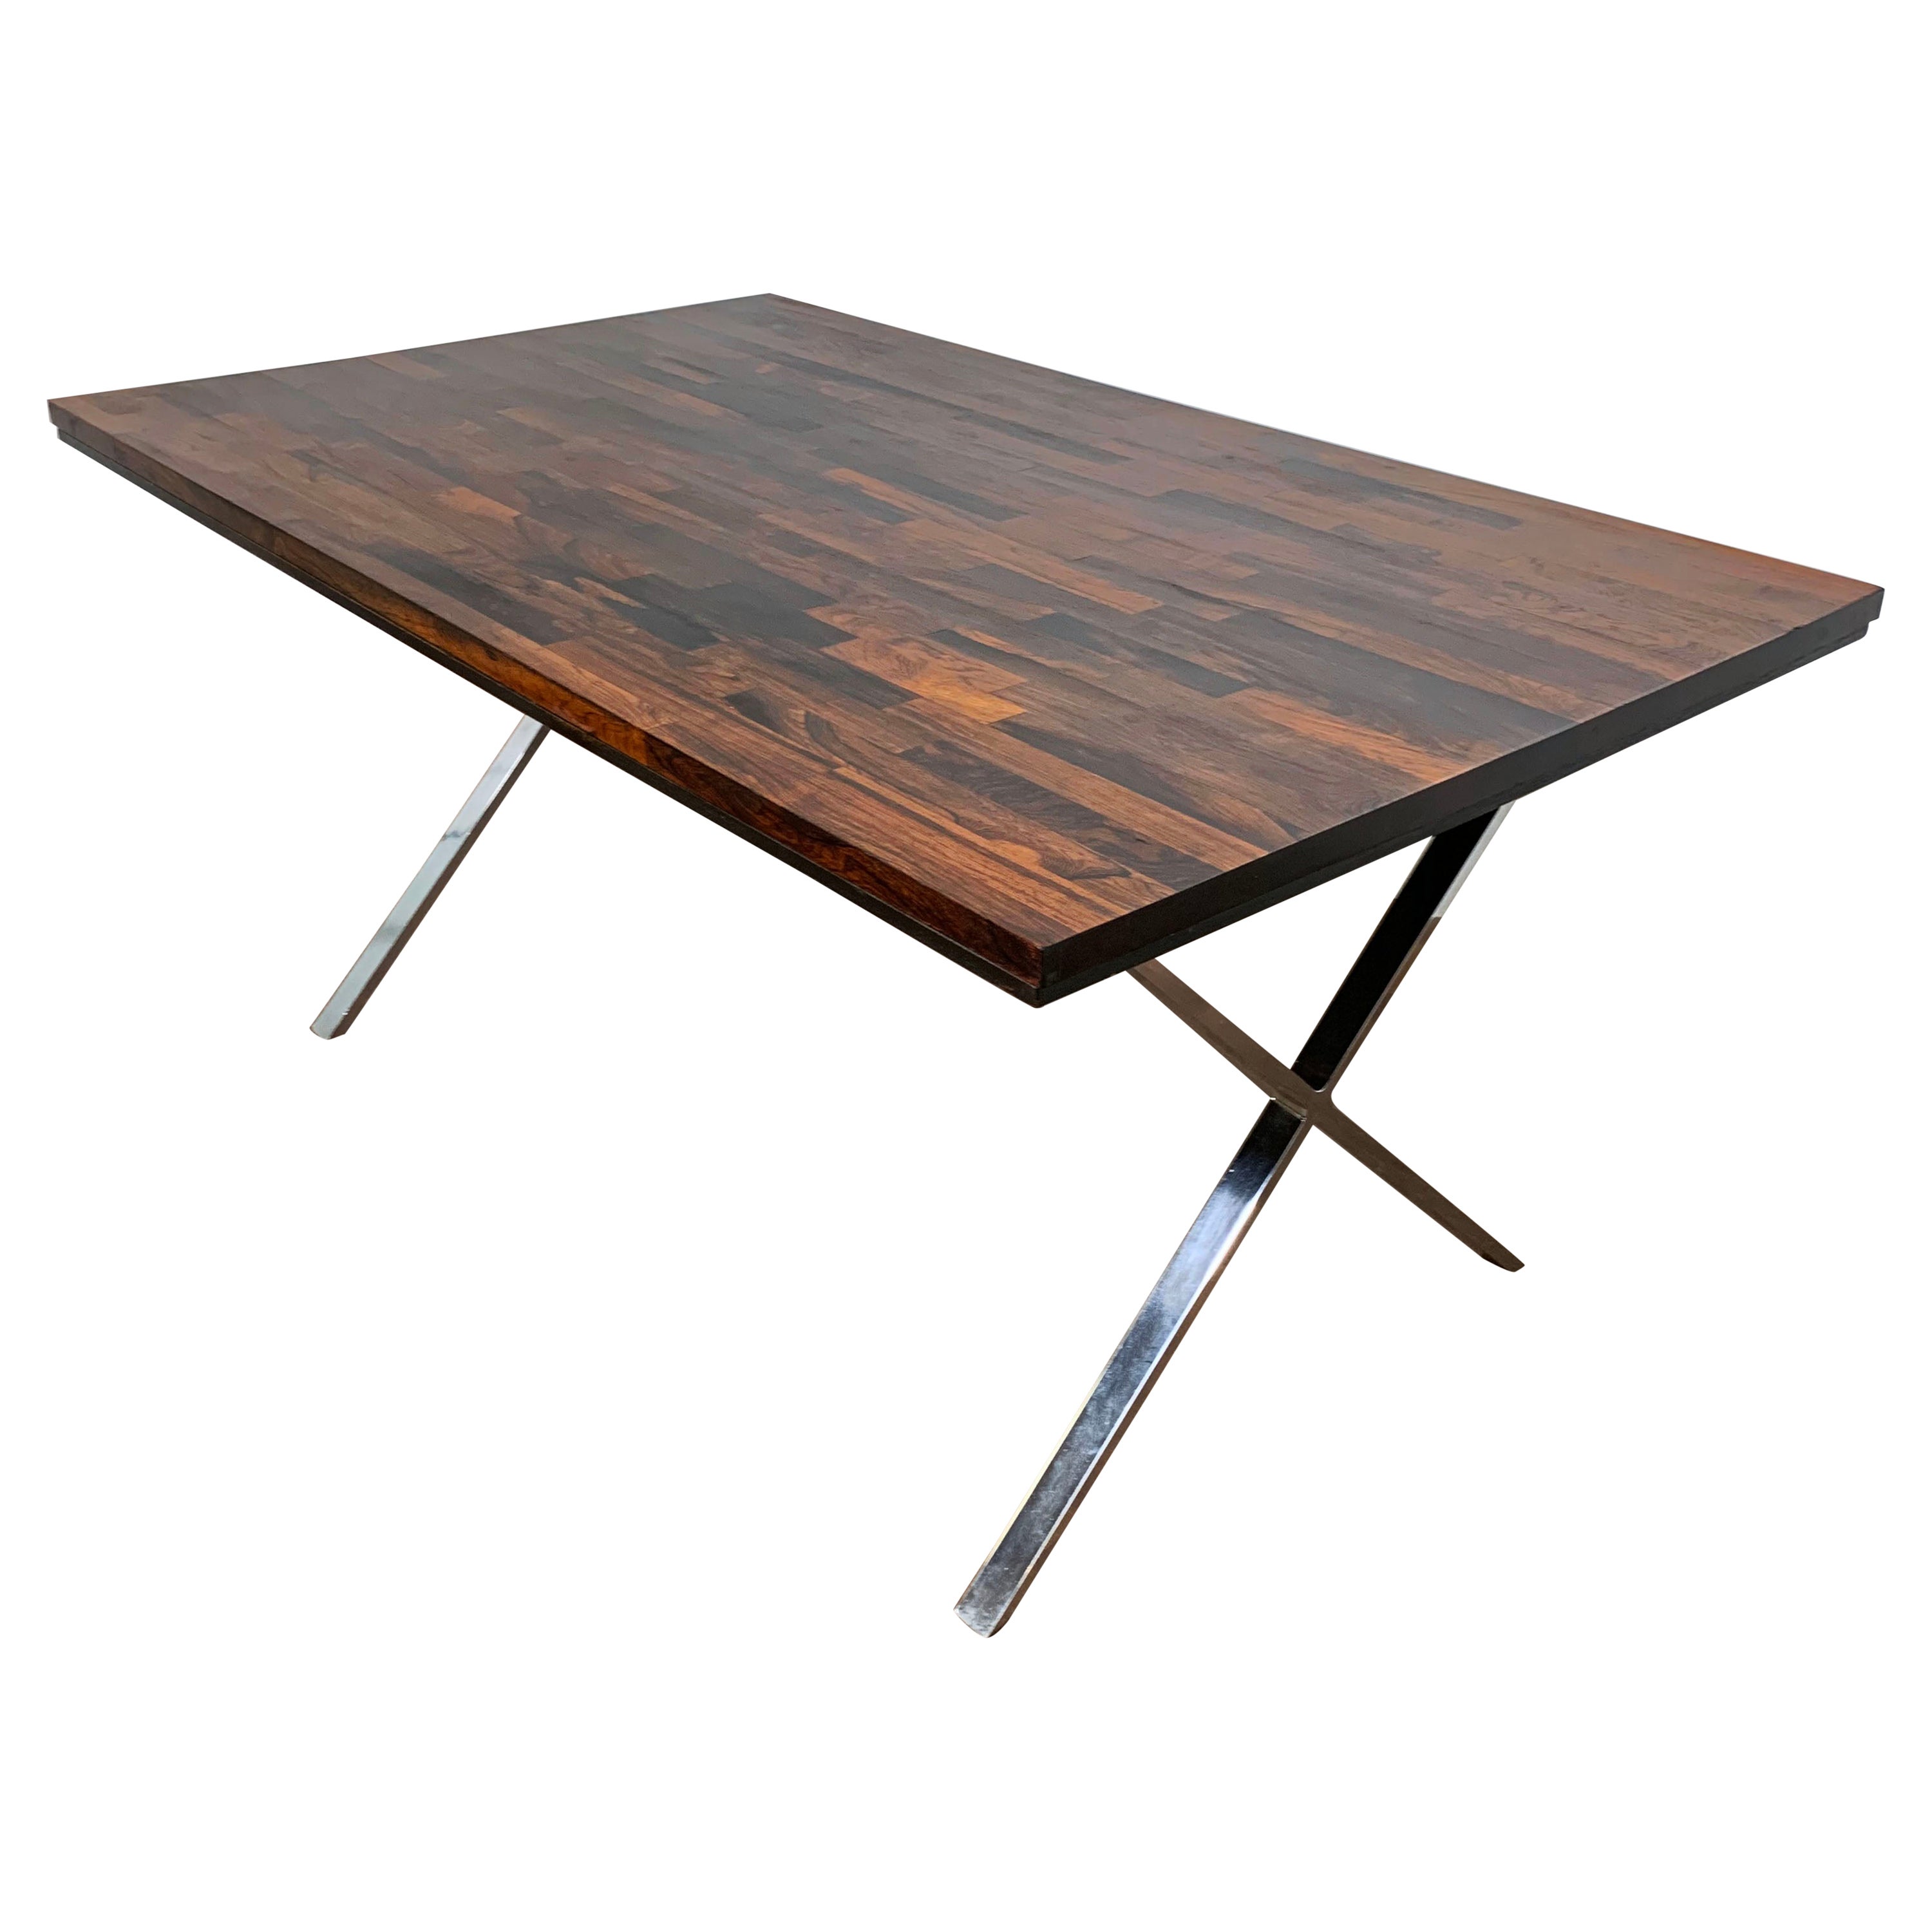 David Parmelee for Founders Staved Rosewood X-Form Desk or Table, Circa 1970s For Sale